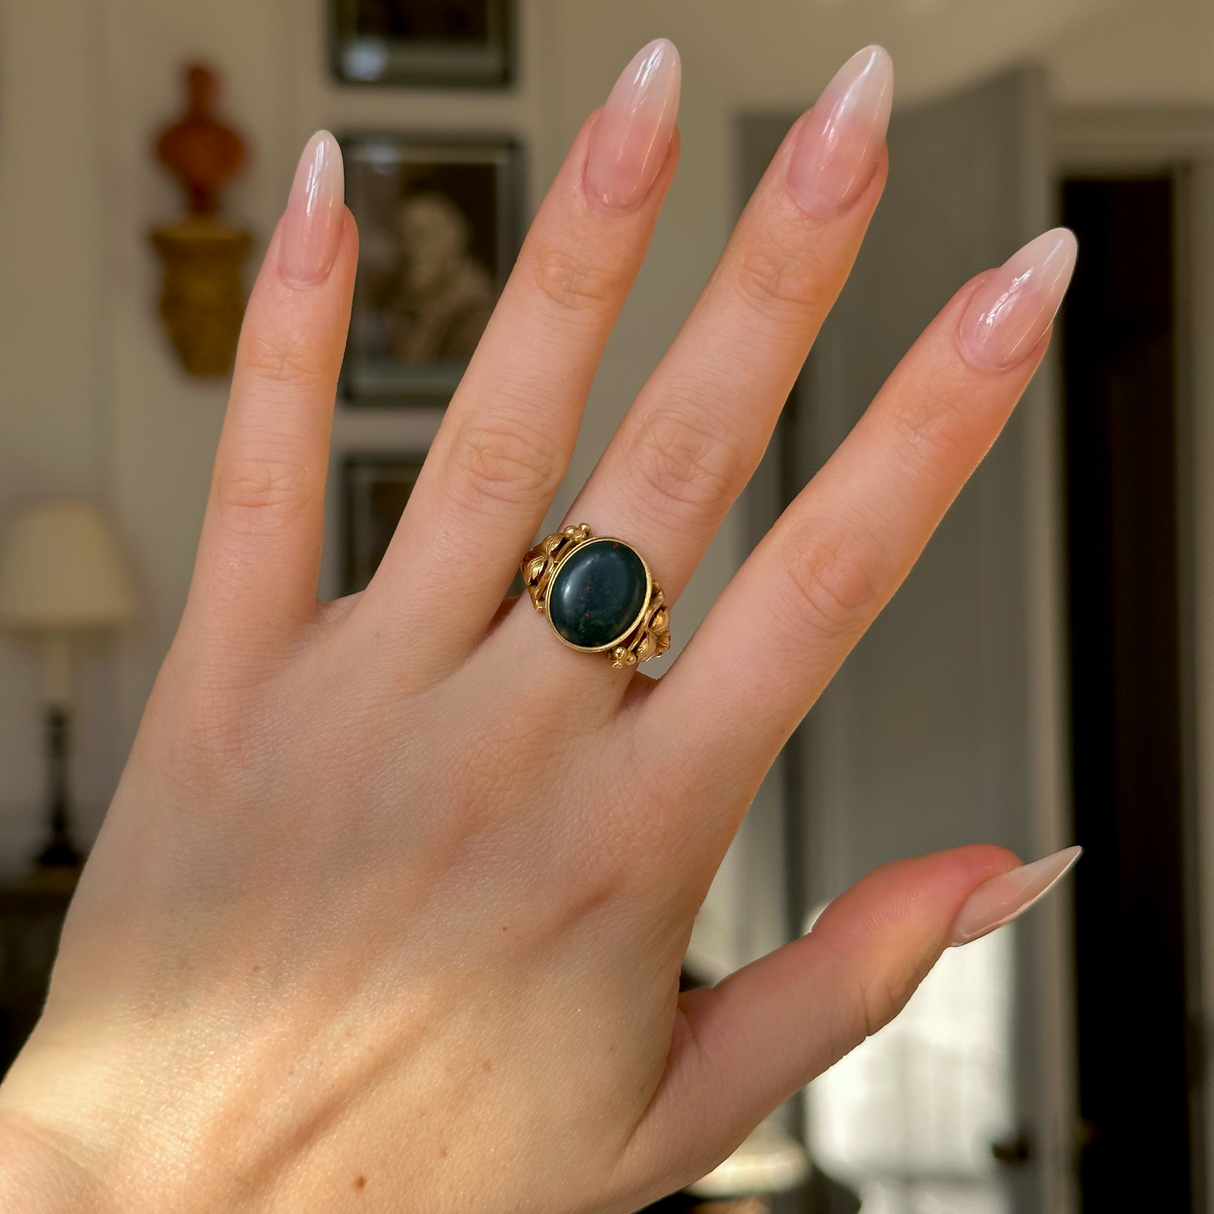 Antique, Victorian Bloodstone Signet Ring, 18ct Yellow Gold worn on hand.